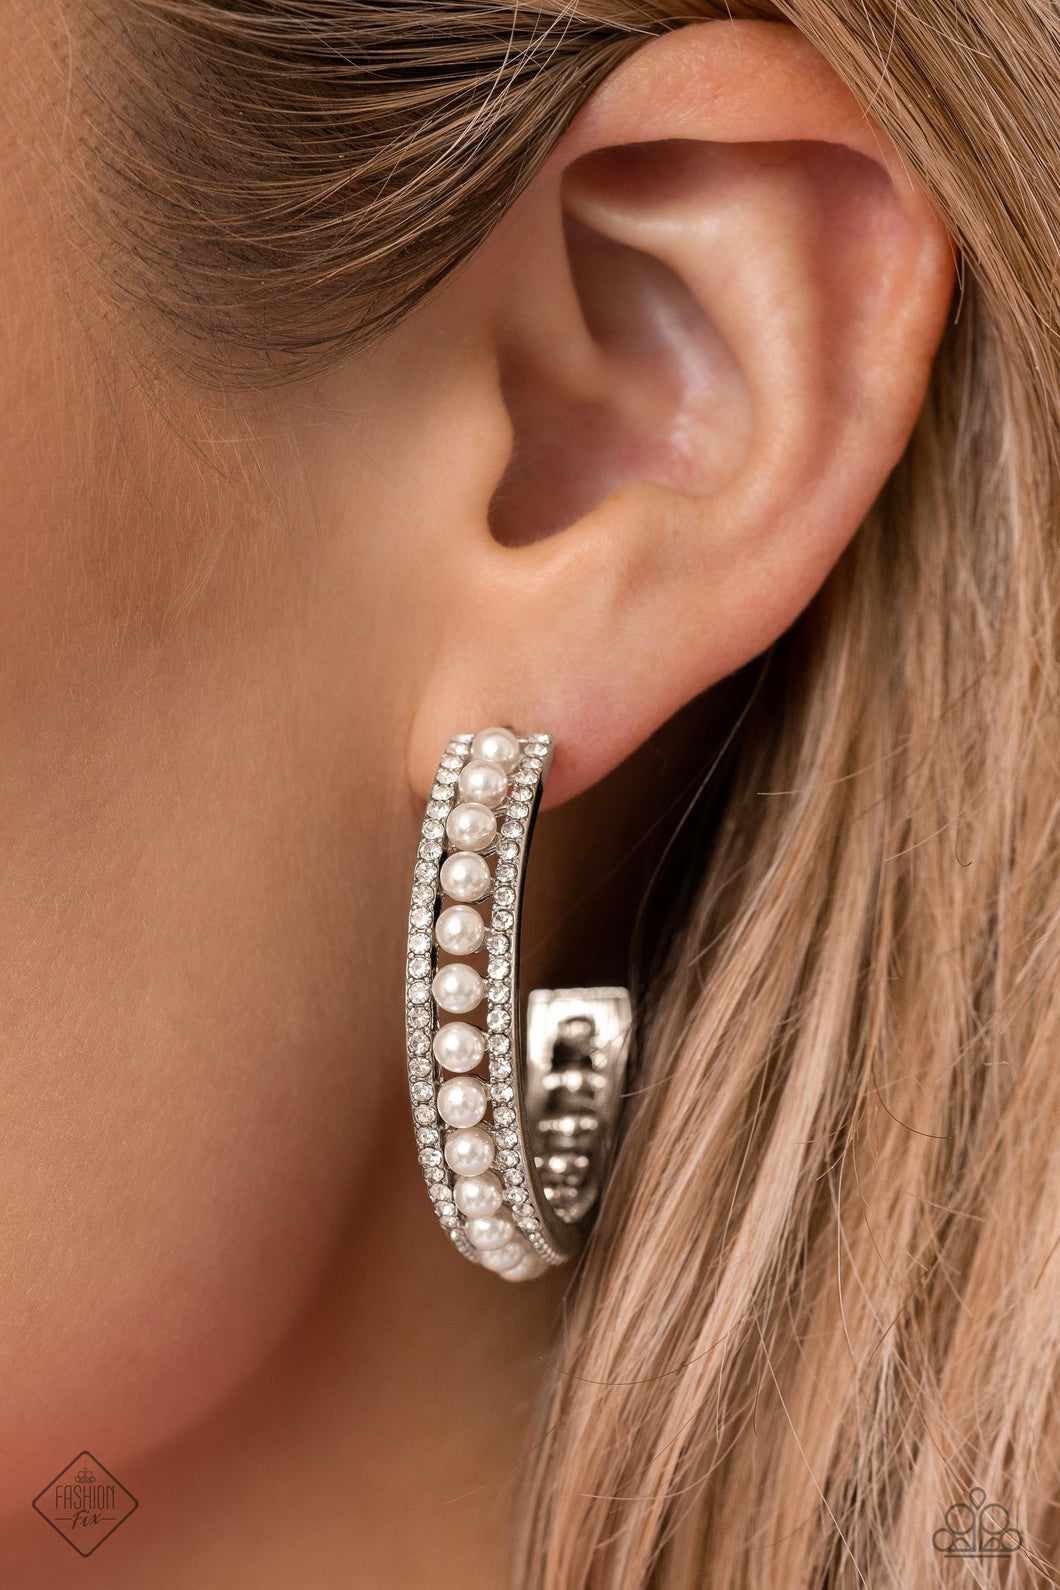 Atlantic Affair - Silver Pearl Drop Earrings - Paparazzi | Sugar Bee Bling  - Paparazzi Jewelry and Accessories